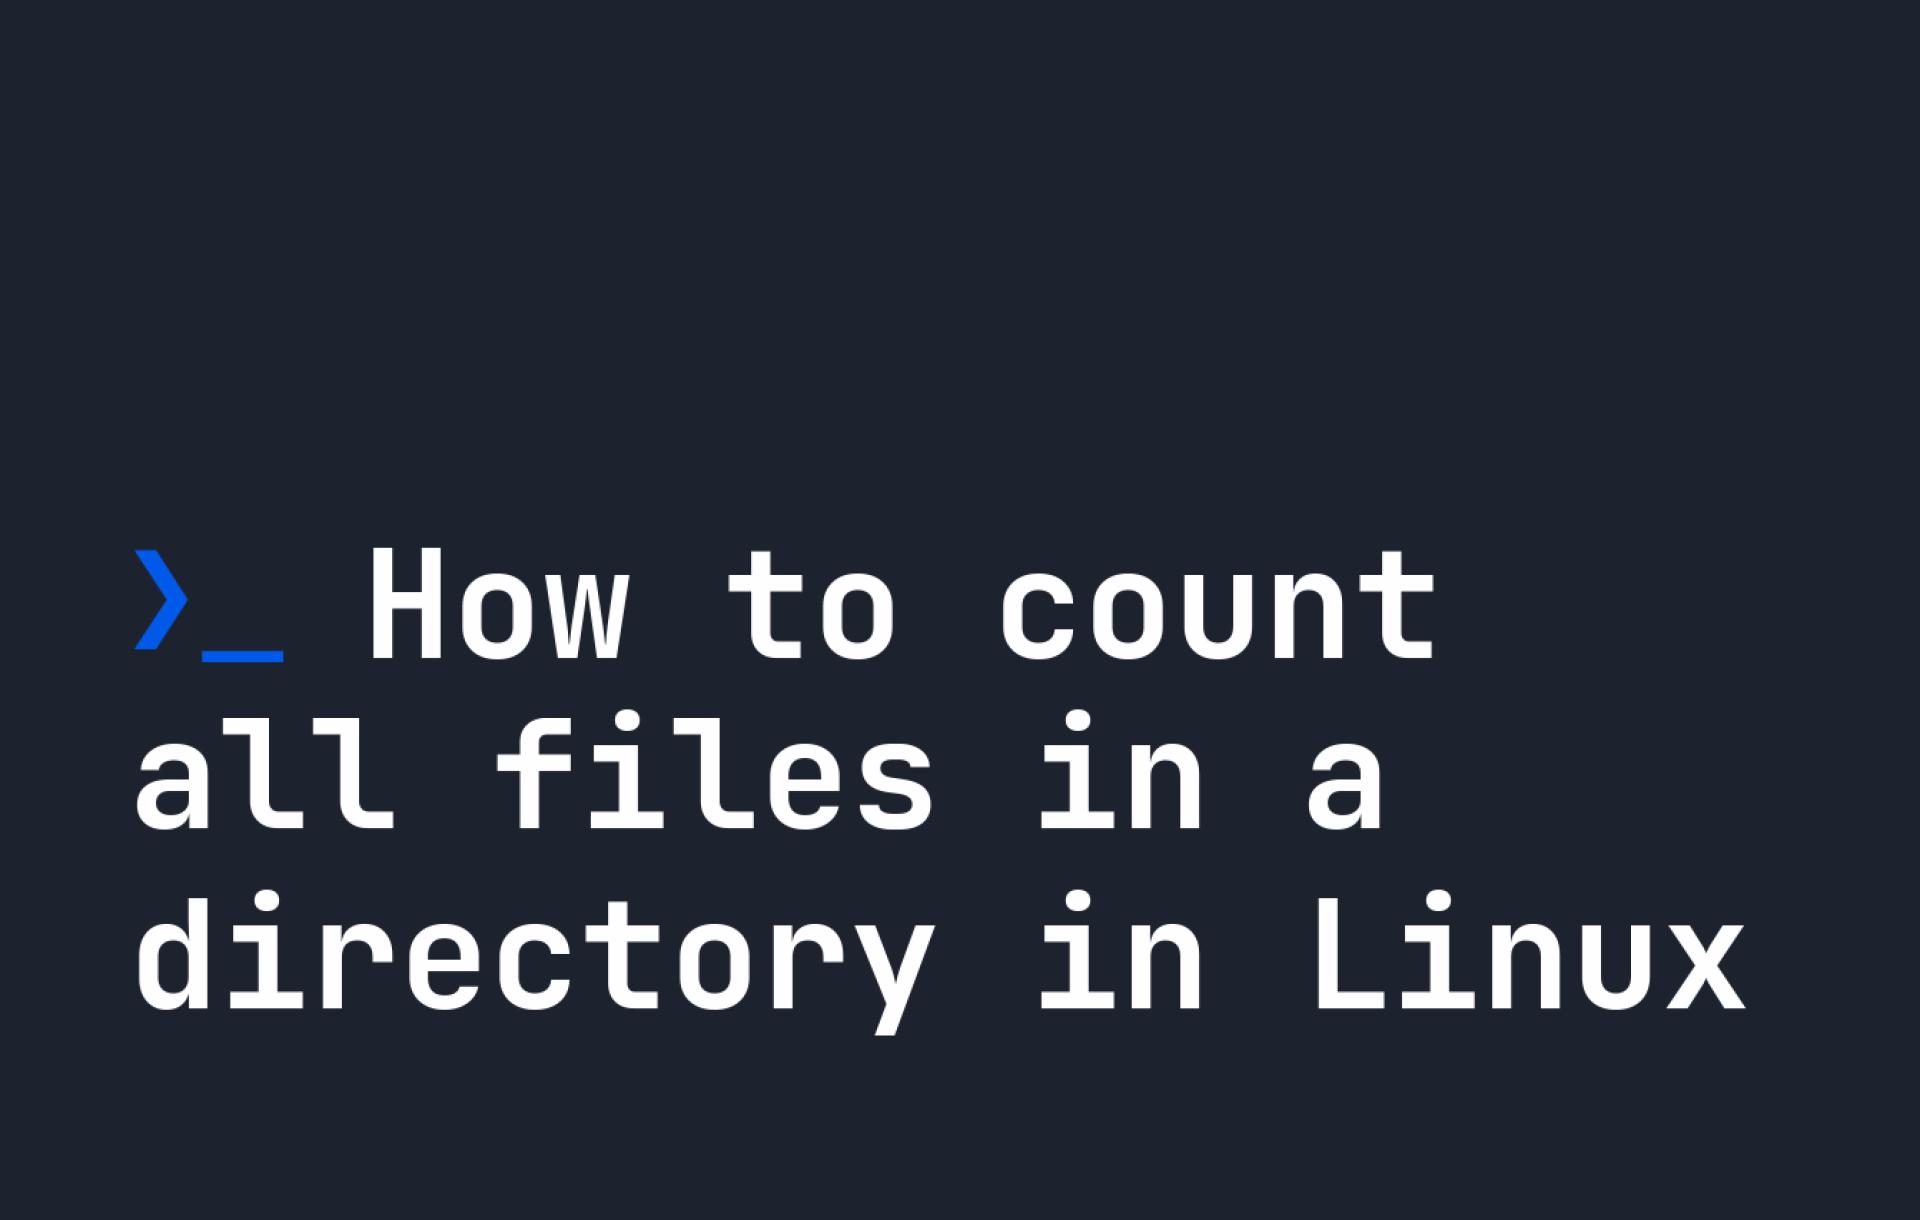 How to count all files in a directory in Linux